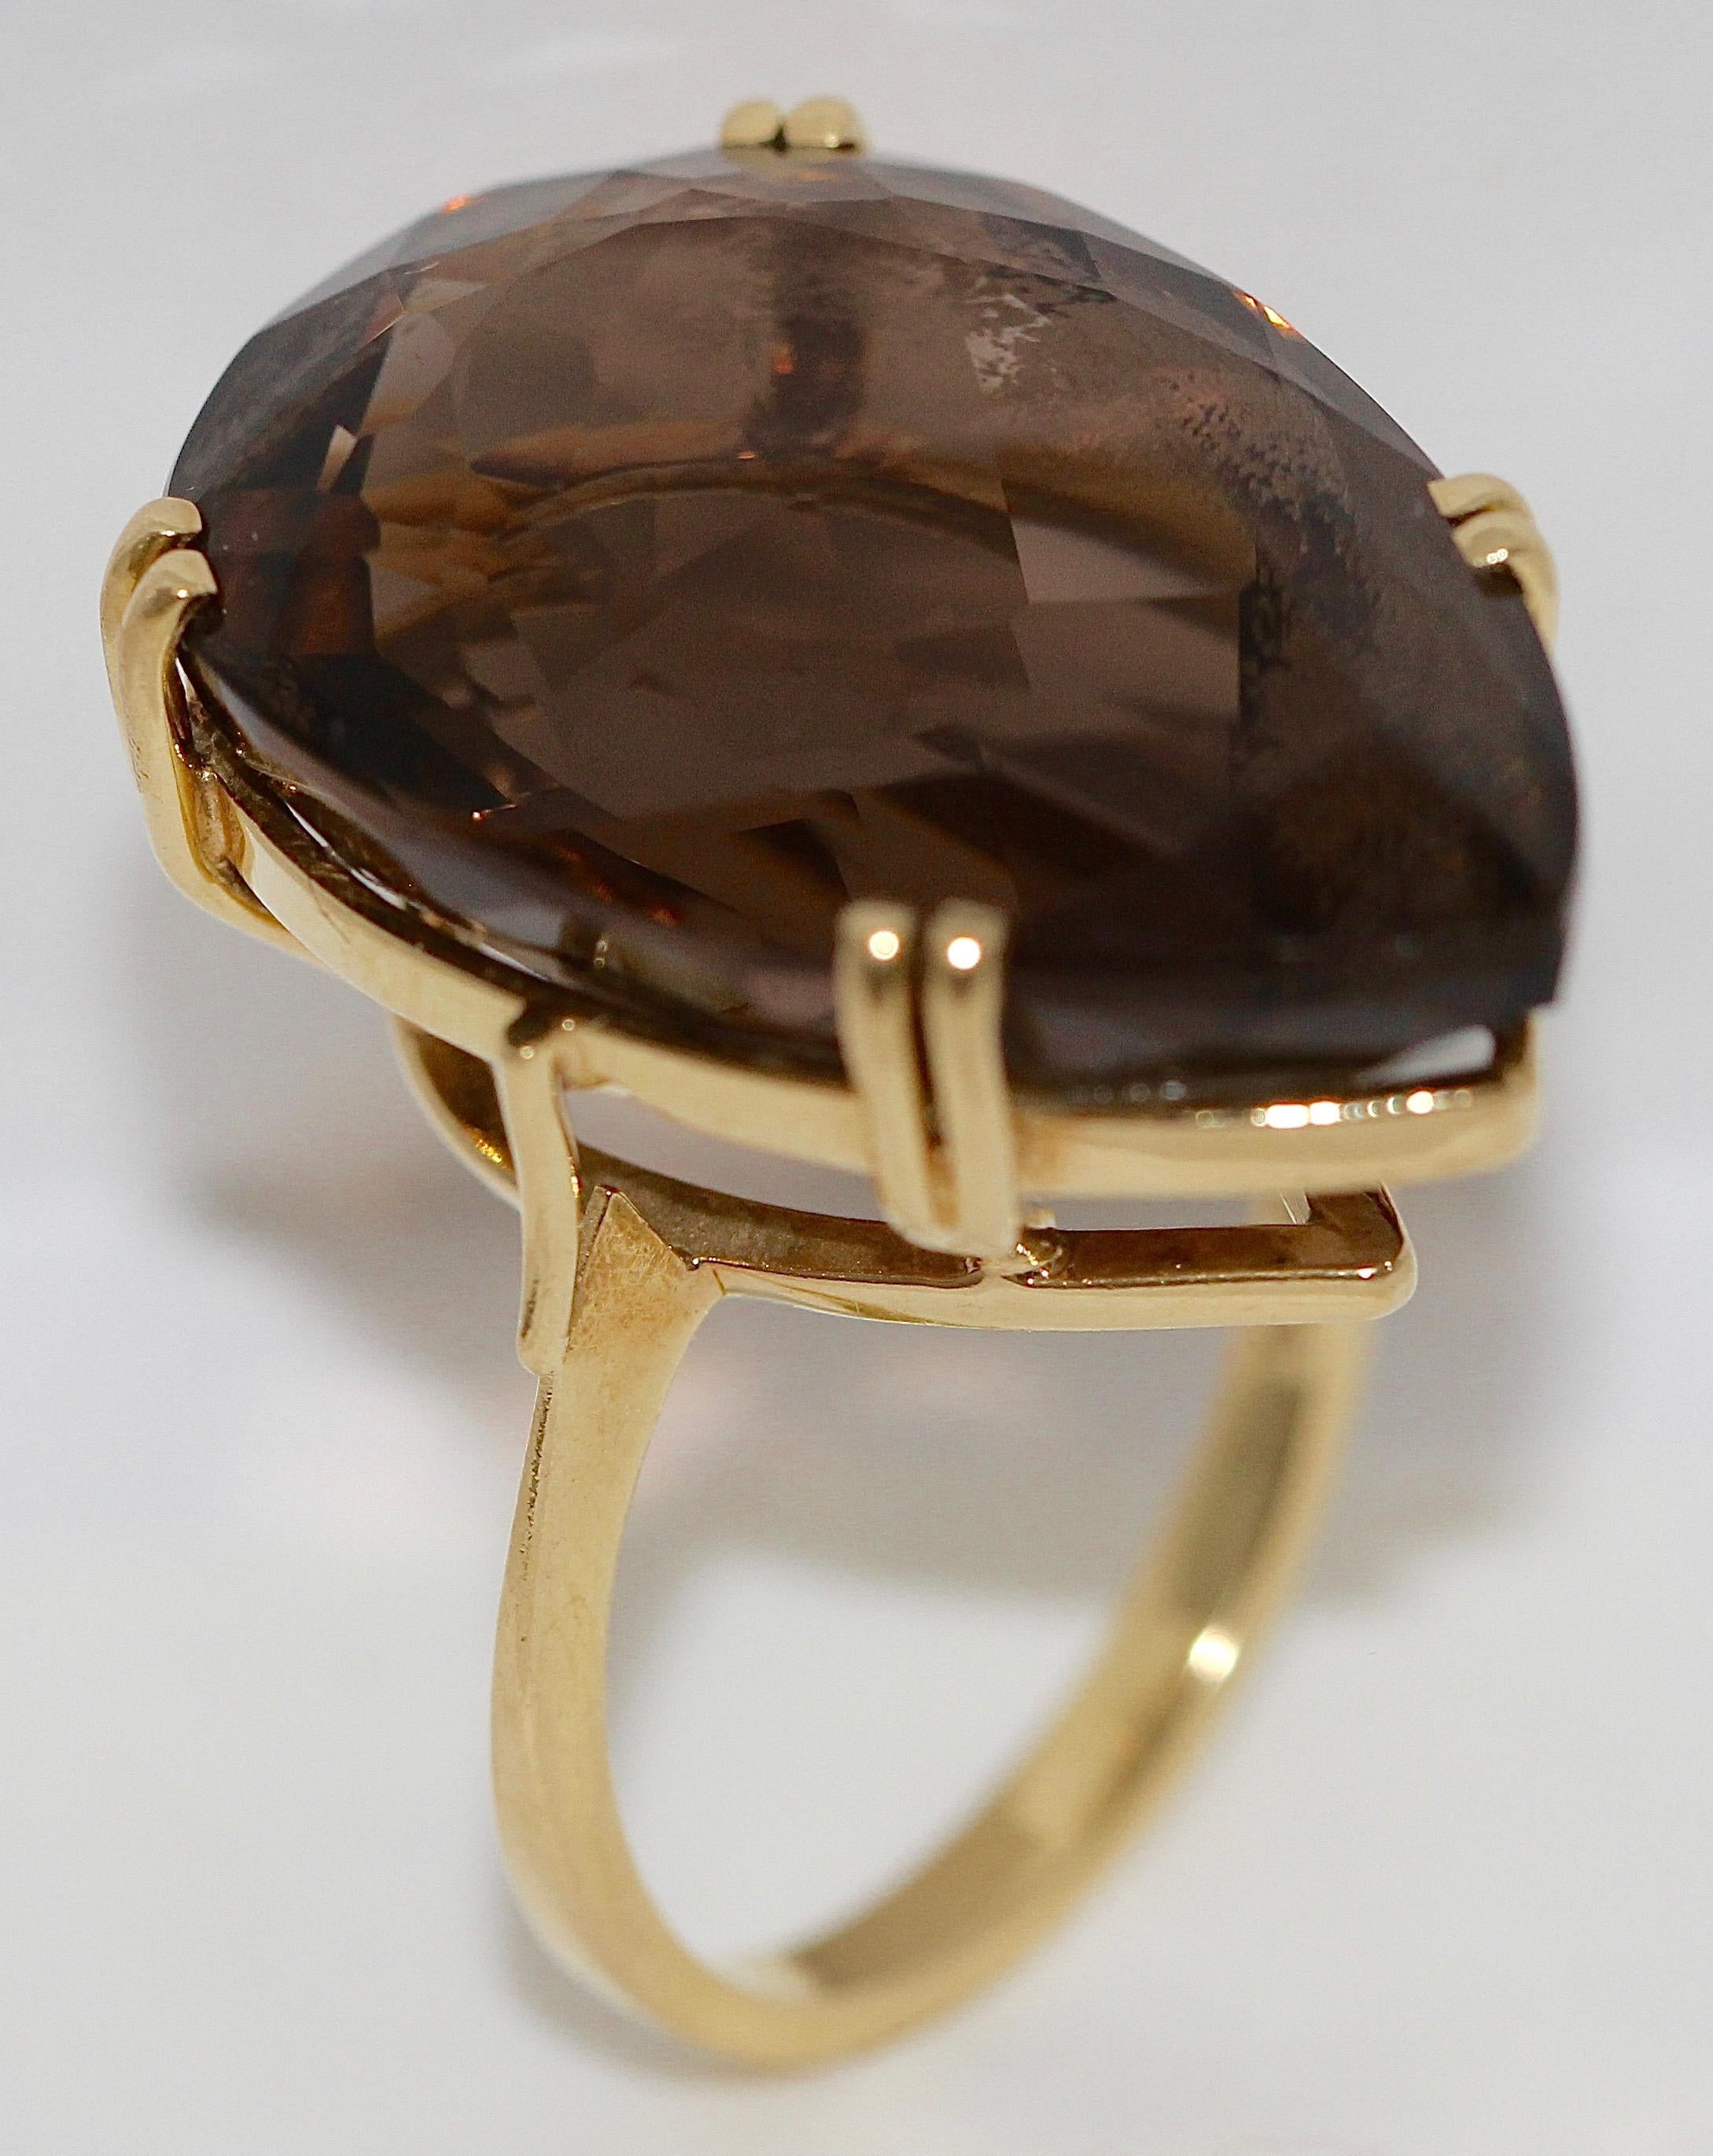 Beautiful ring with large, faceted smoky quartz in heart shape.

Very good condition.